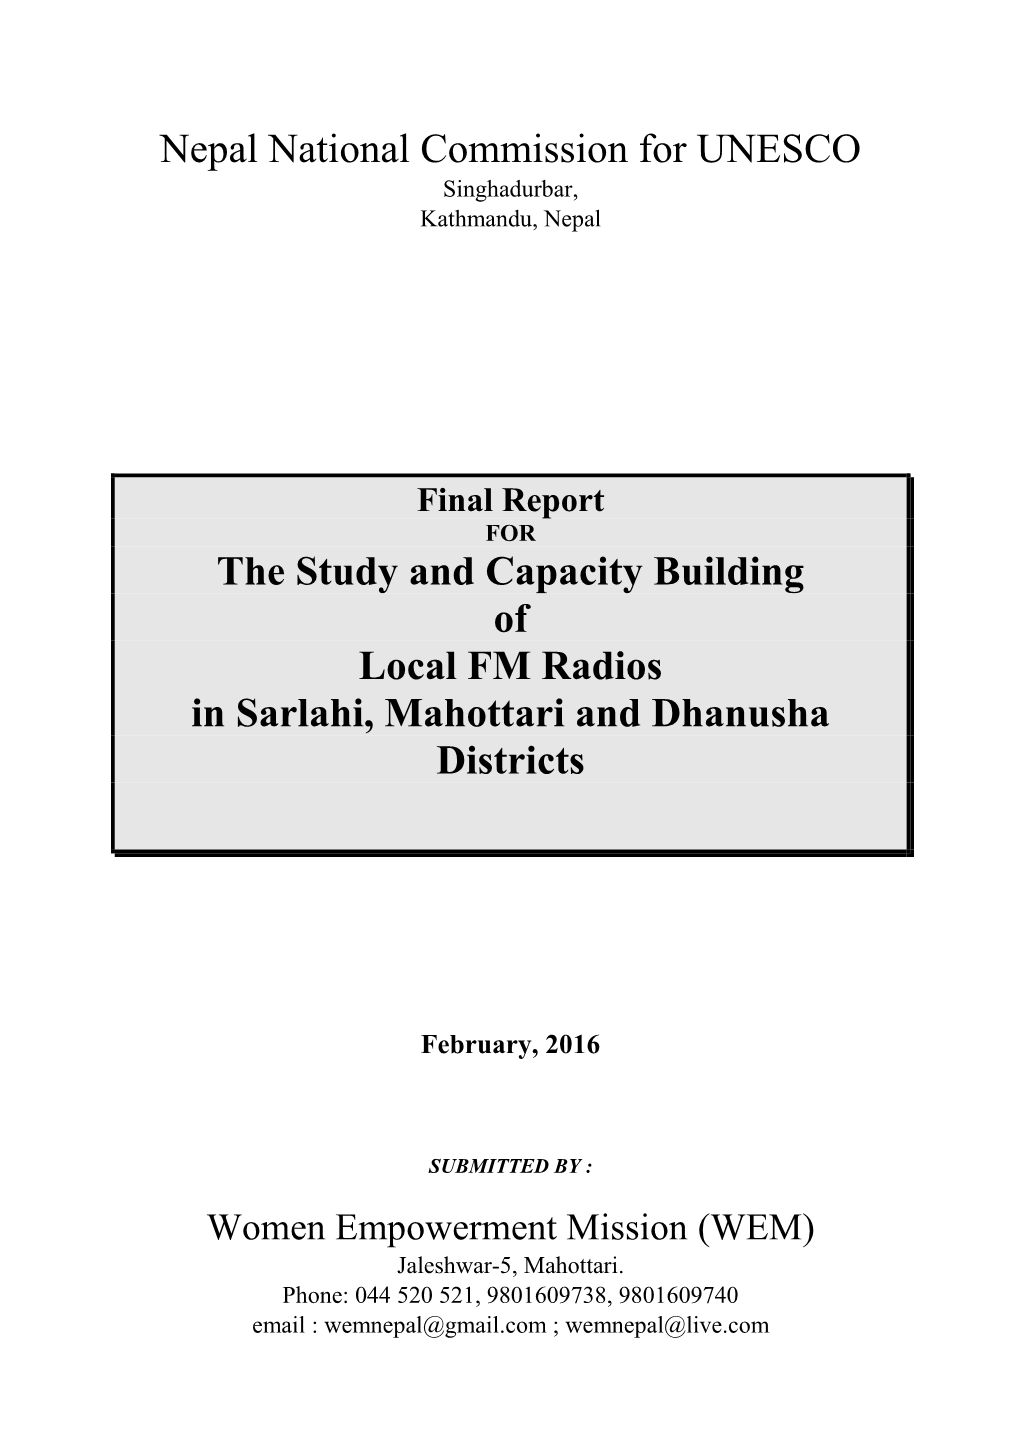 Nepal National Commission for UNESCO the Study and Capacity